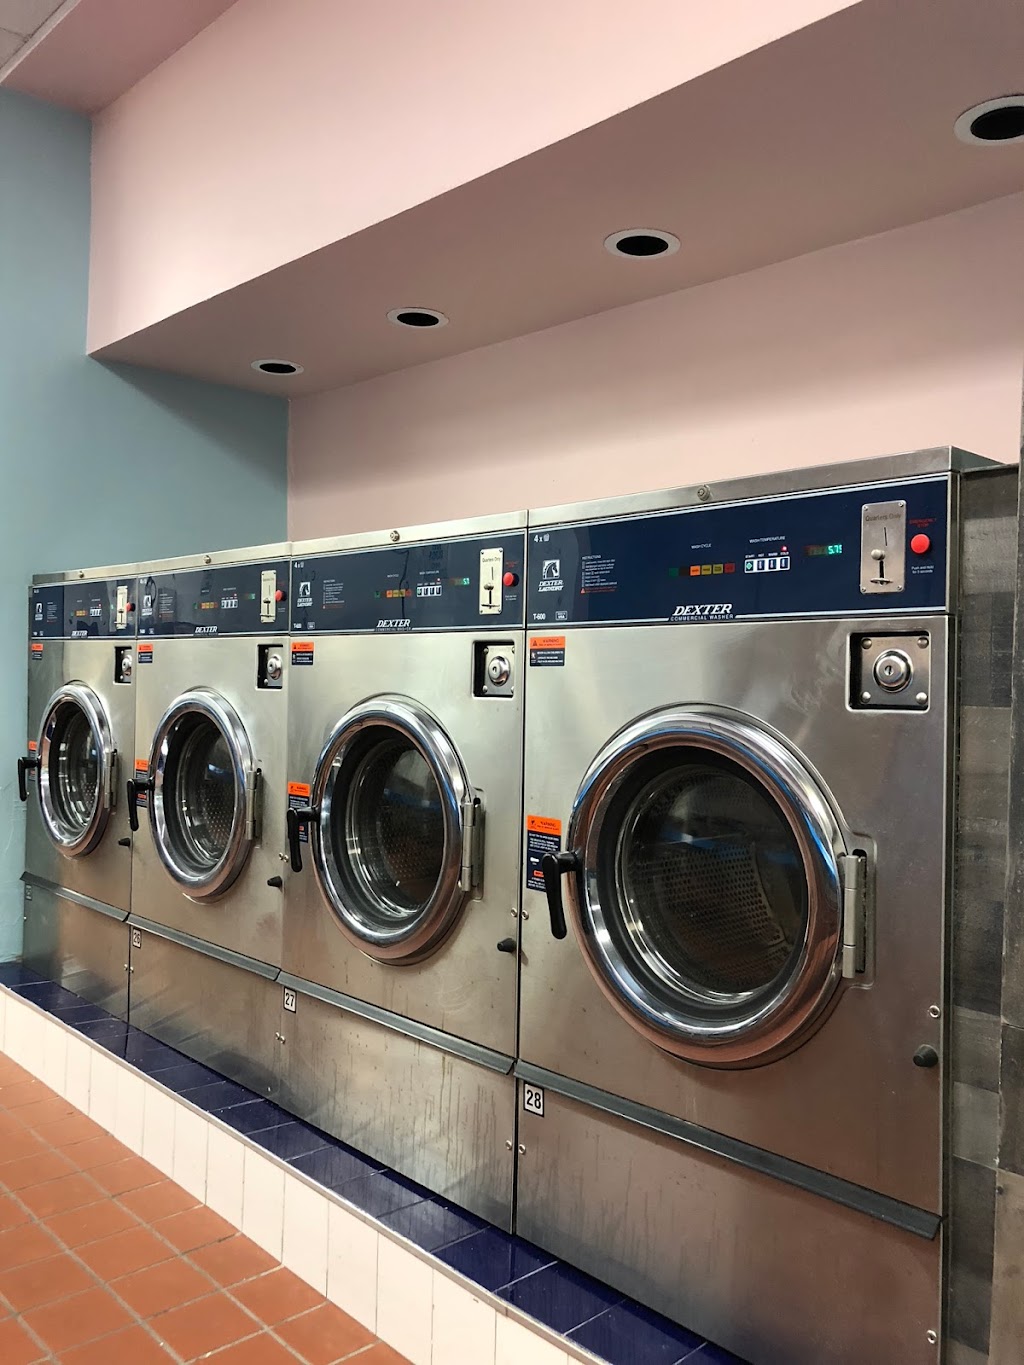 Wash and Fold - Dry Cleaner & Coin Laundry | 15070 Sunset Dr, Miami, FL 33193 | Phone: (305) 387-3480